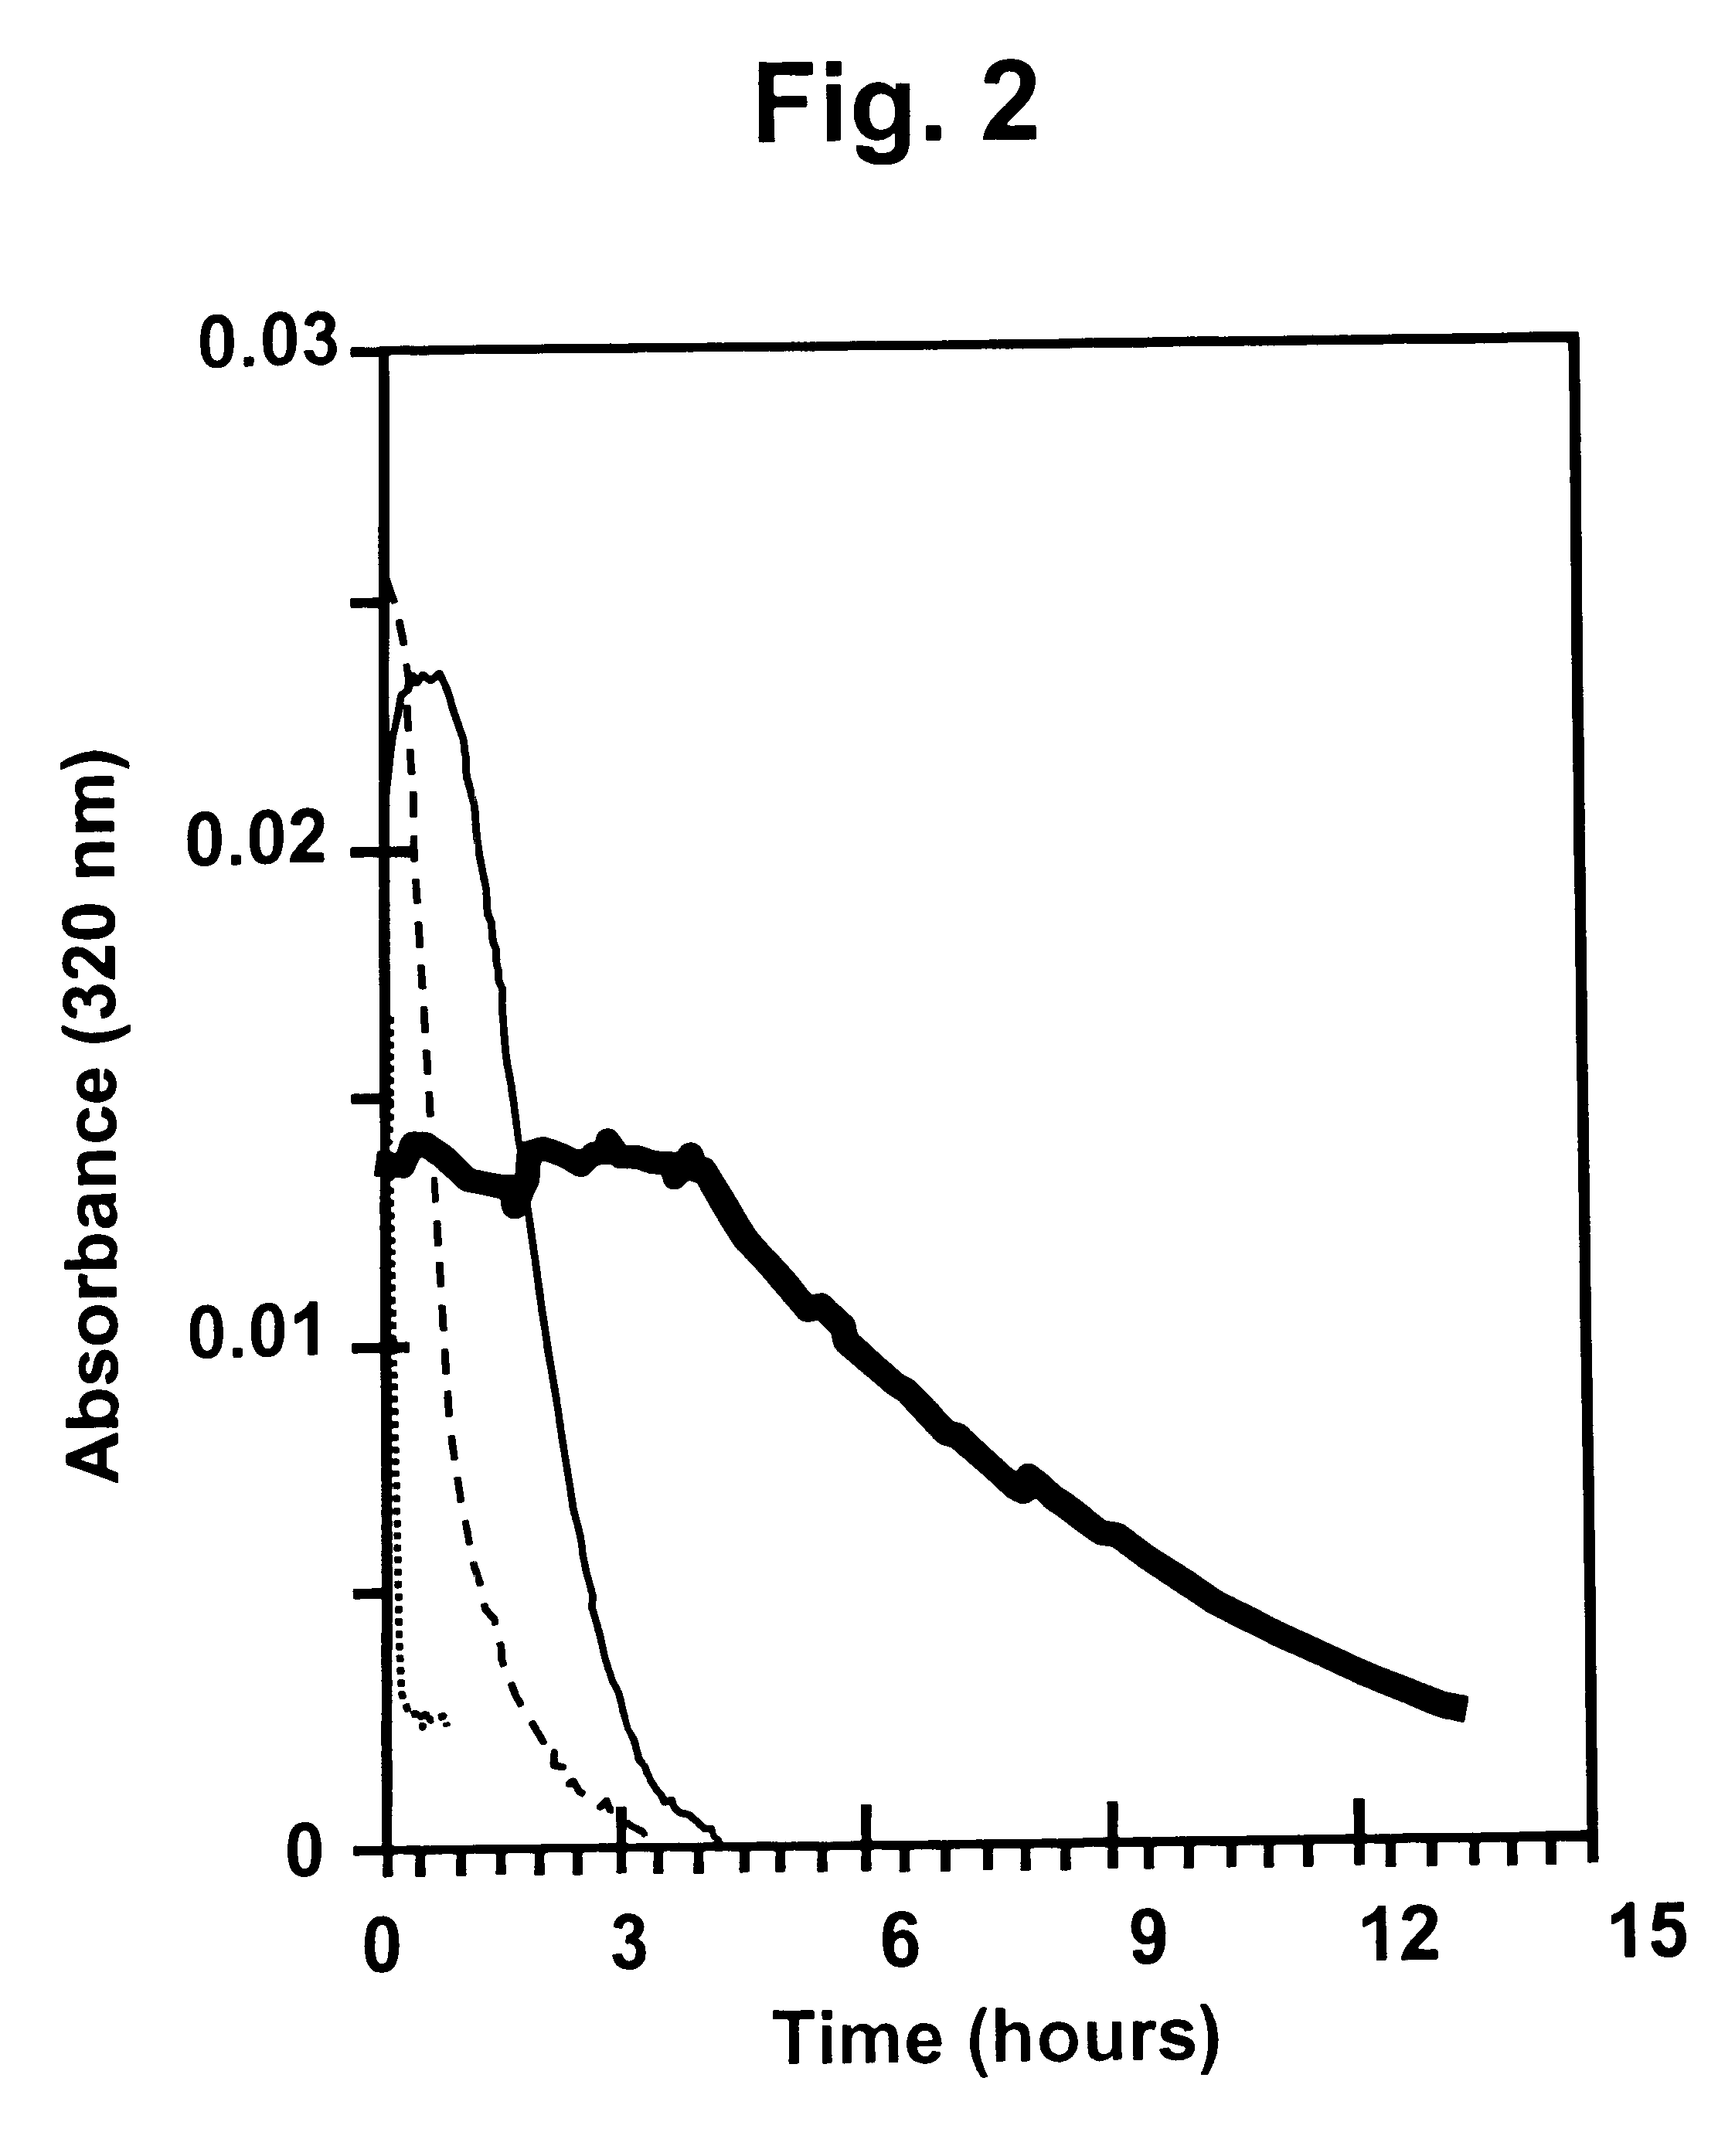 Insoluble compositions for controlling blood glucose